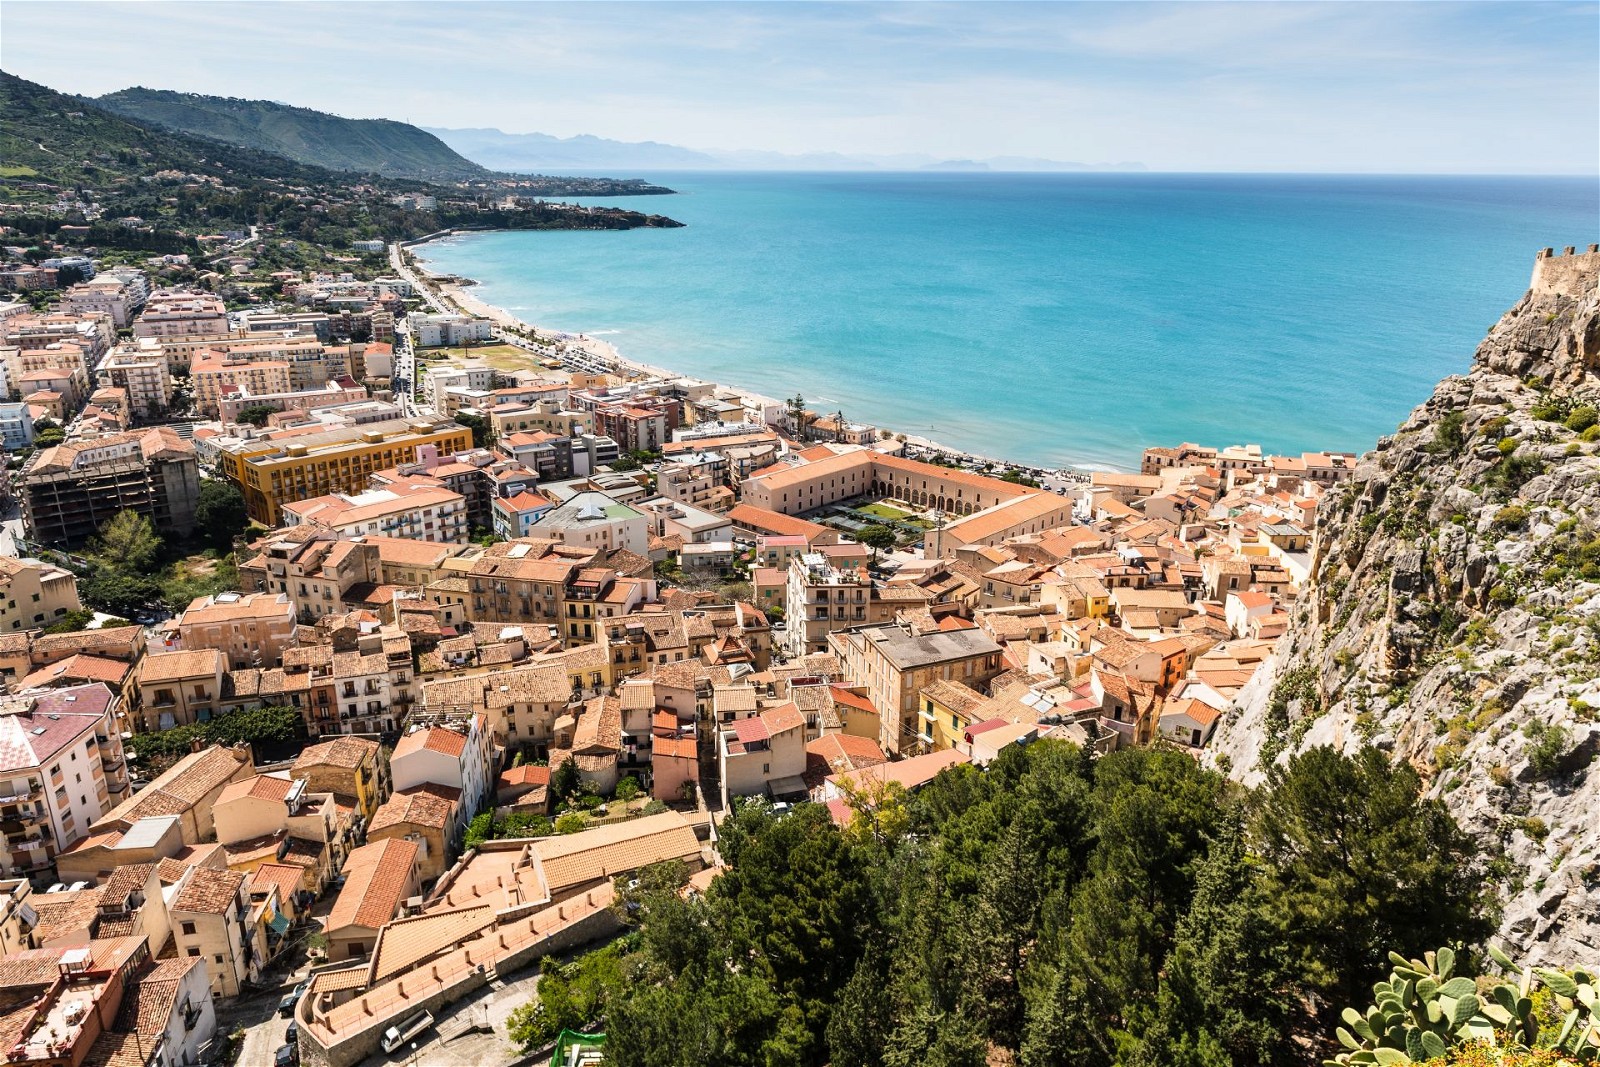 Sicily is an island in the Mediterranean Sea that boasts stunning landscapes, rich history, and delicious cuisine